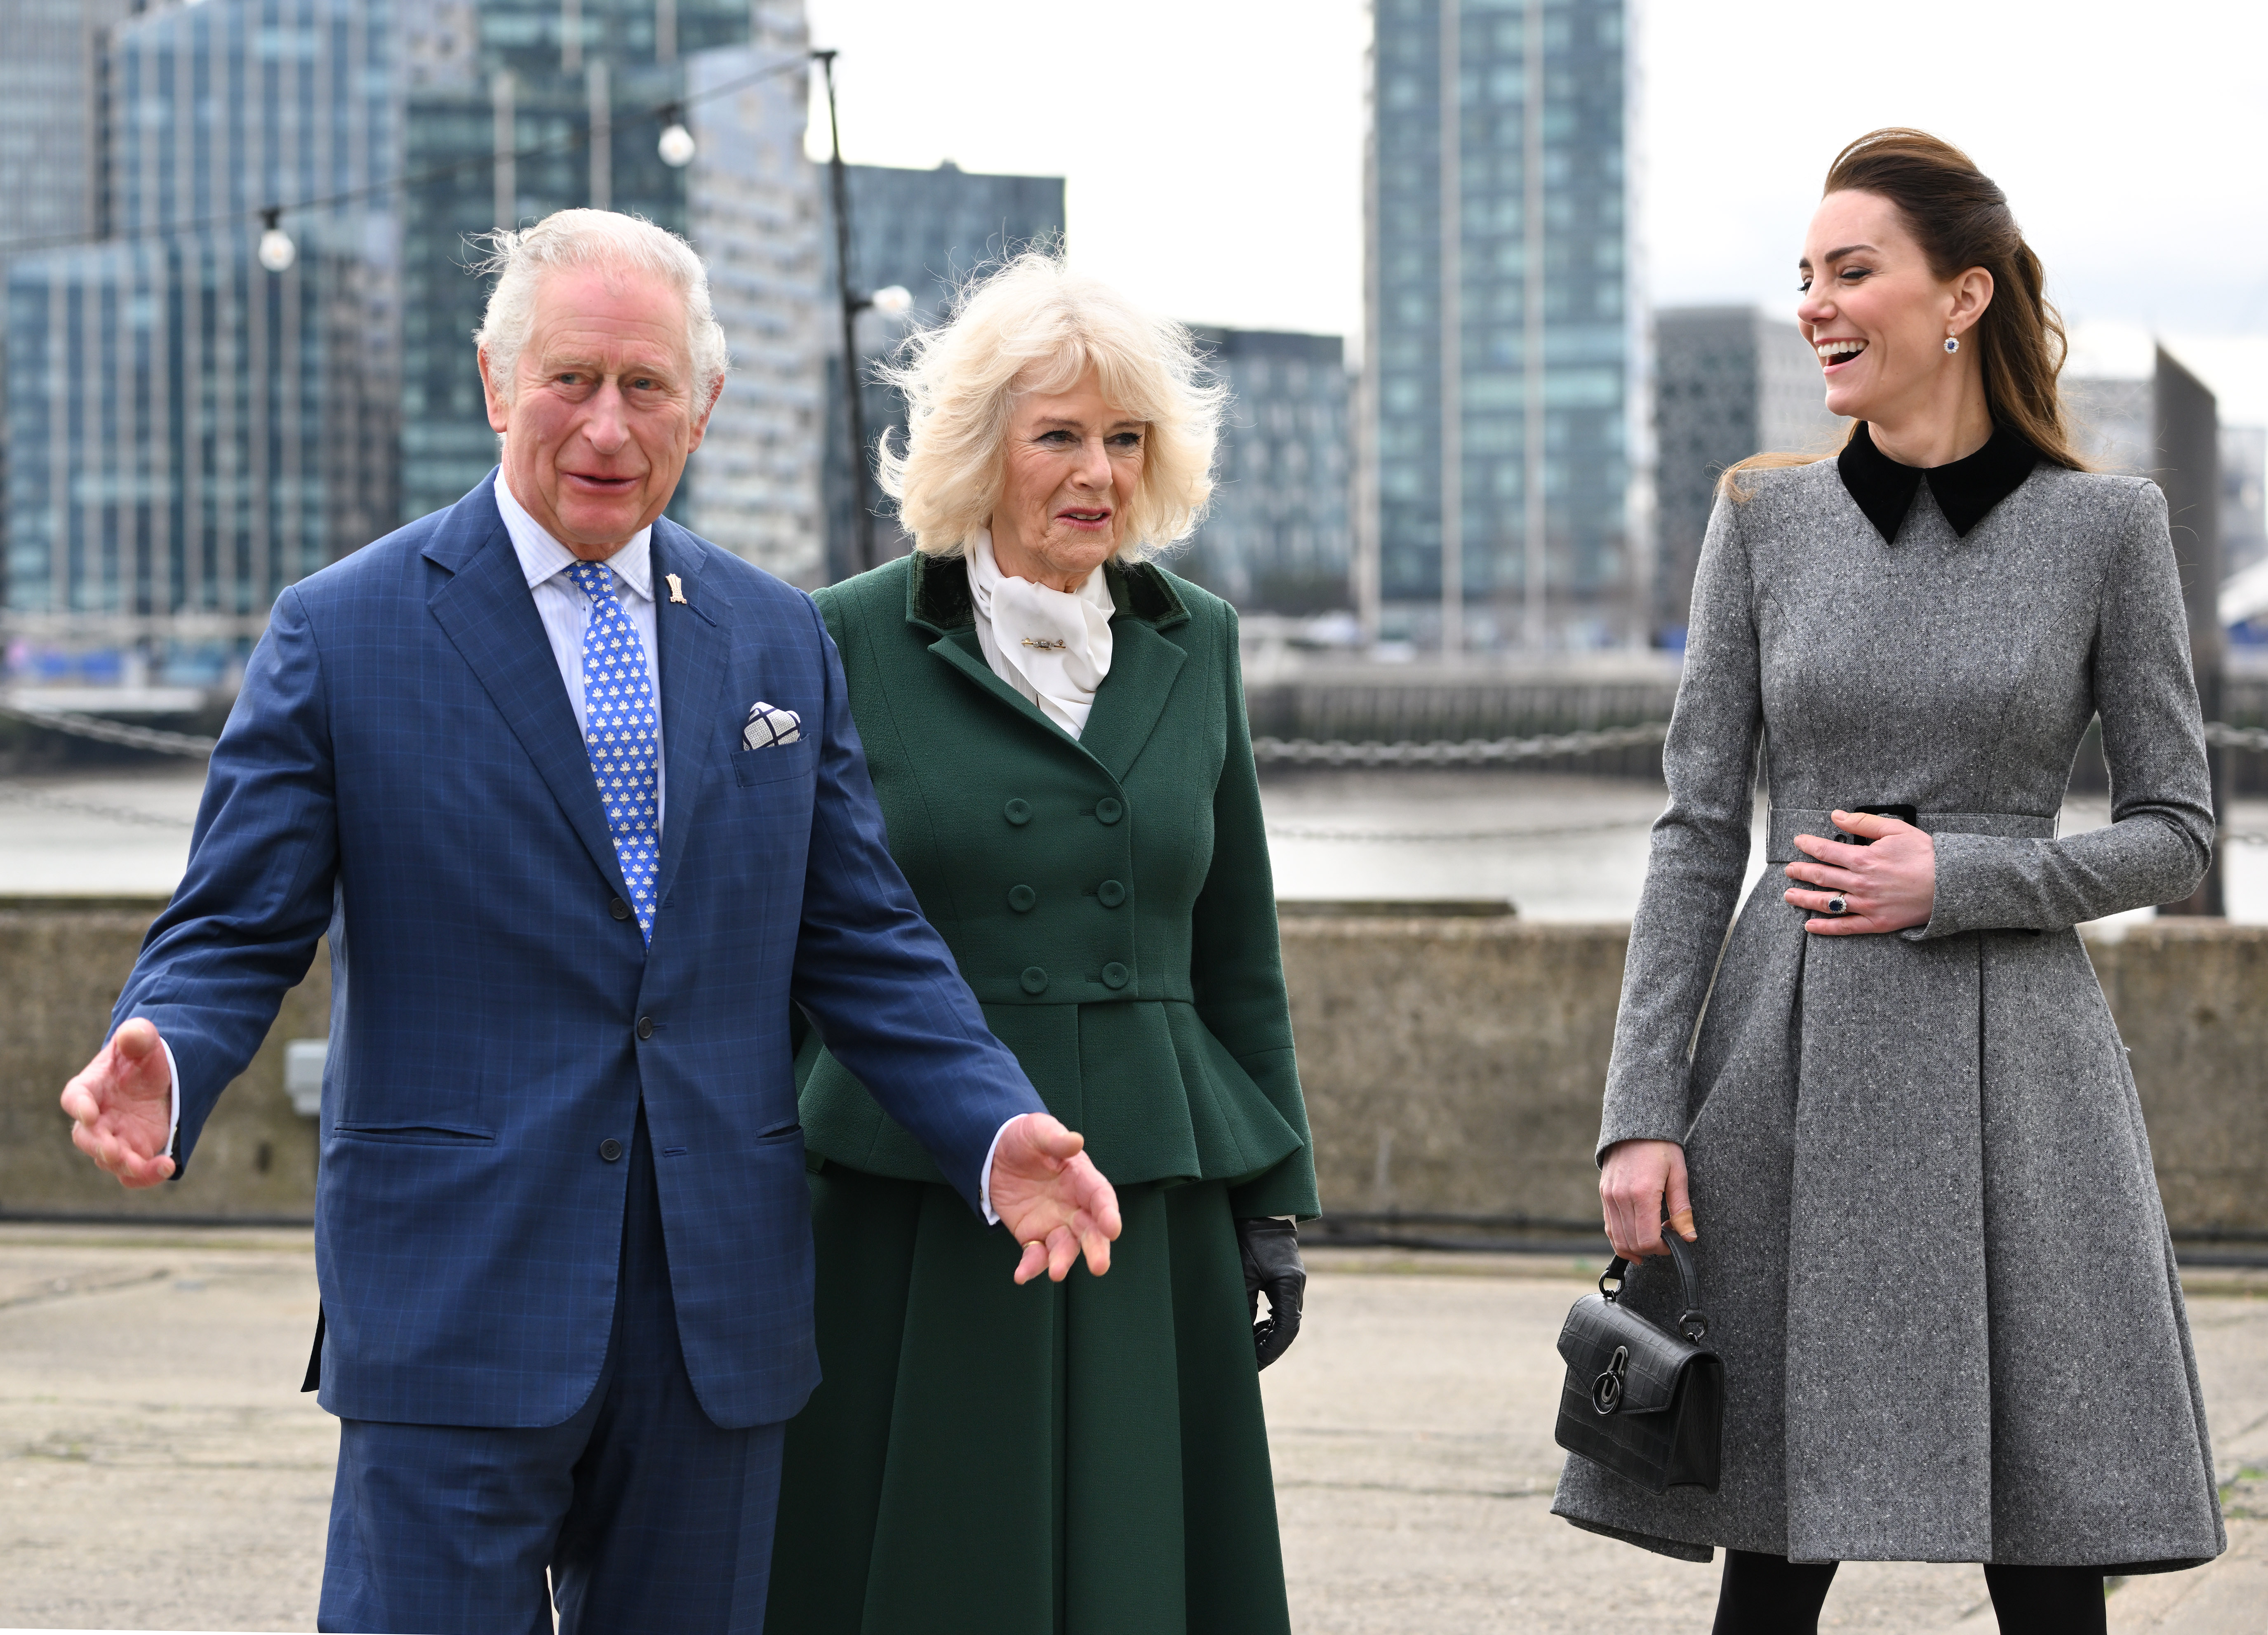 King Charles III, Queen Camilla, and Princess Catherine on their visit to The Prince's Foundation training site for arts and culture at Trinity Buoy Wharf on February 03, 2022 in London, England | Source: Getty Images